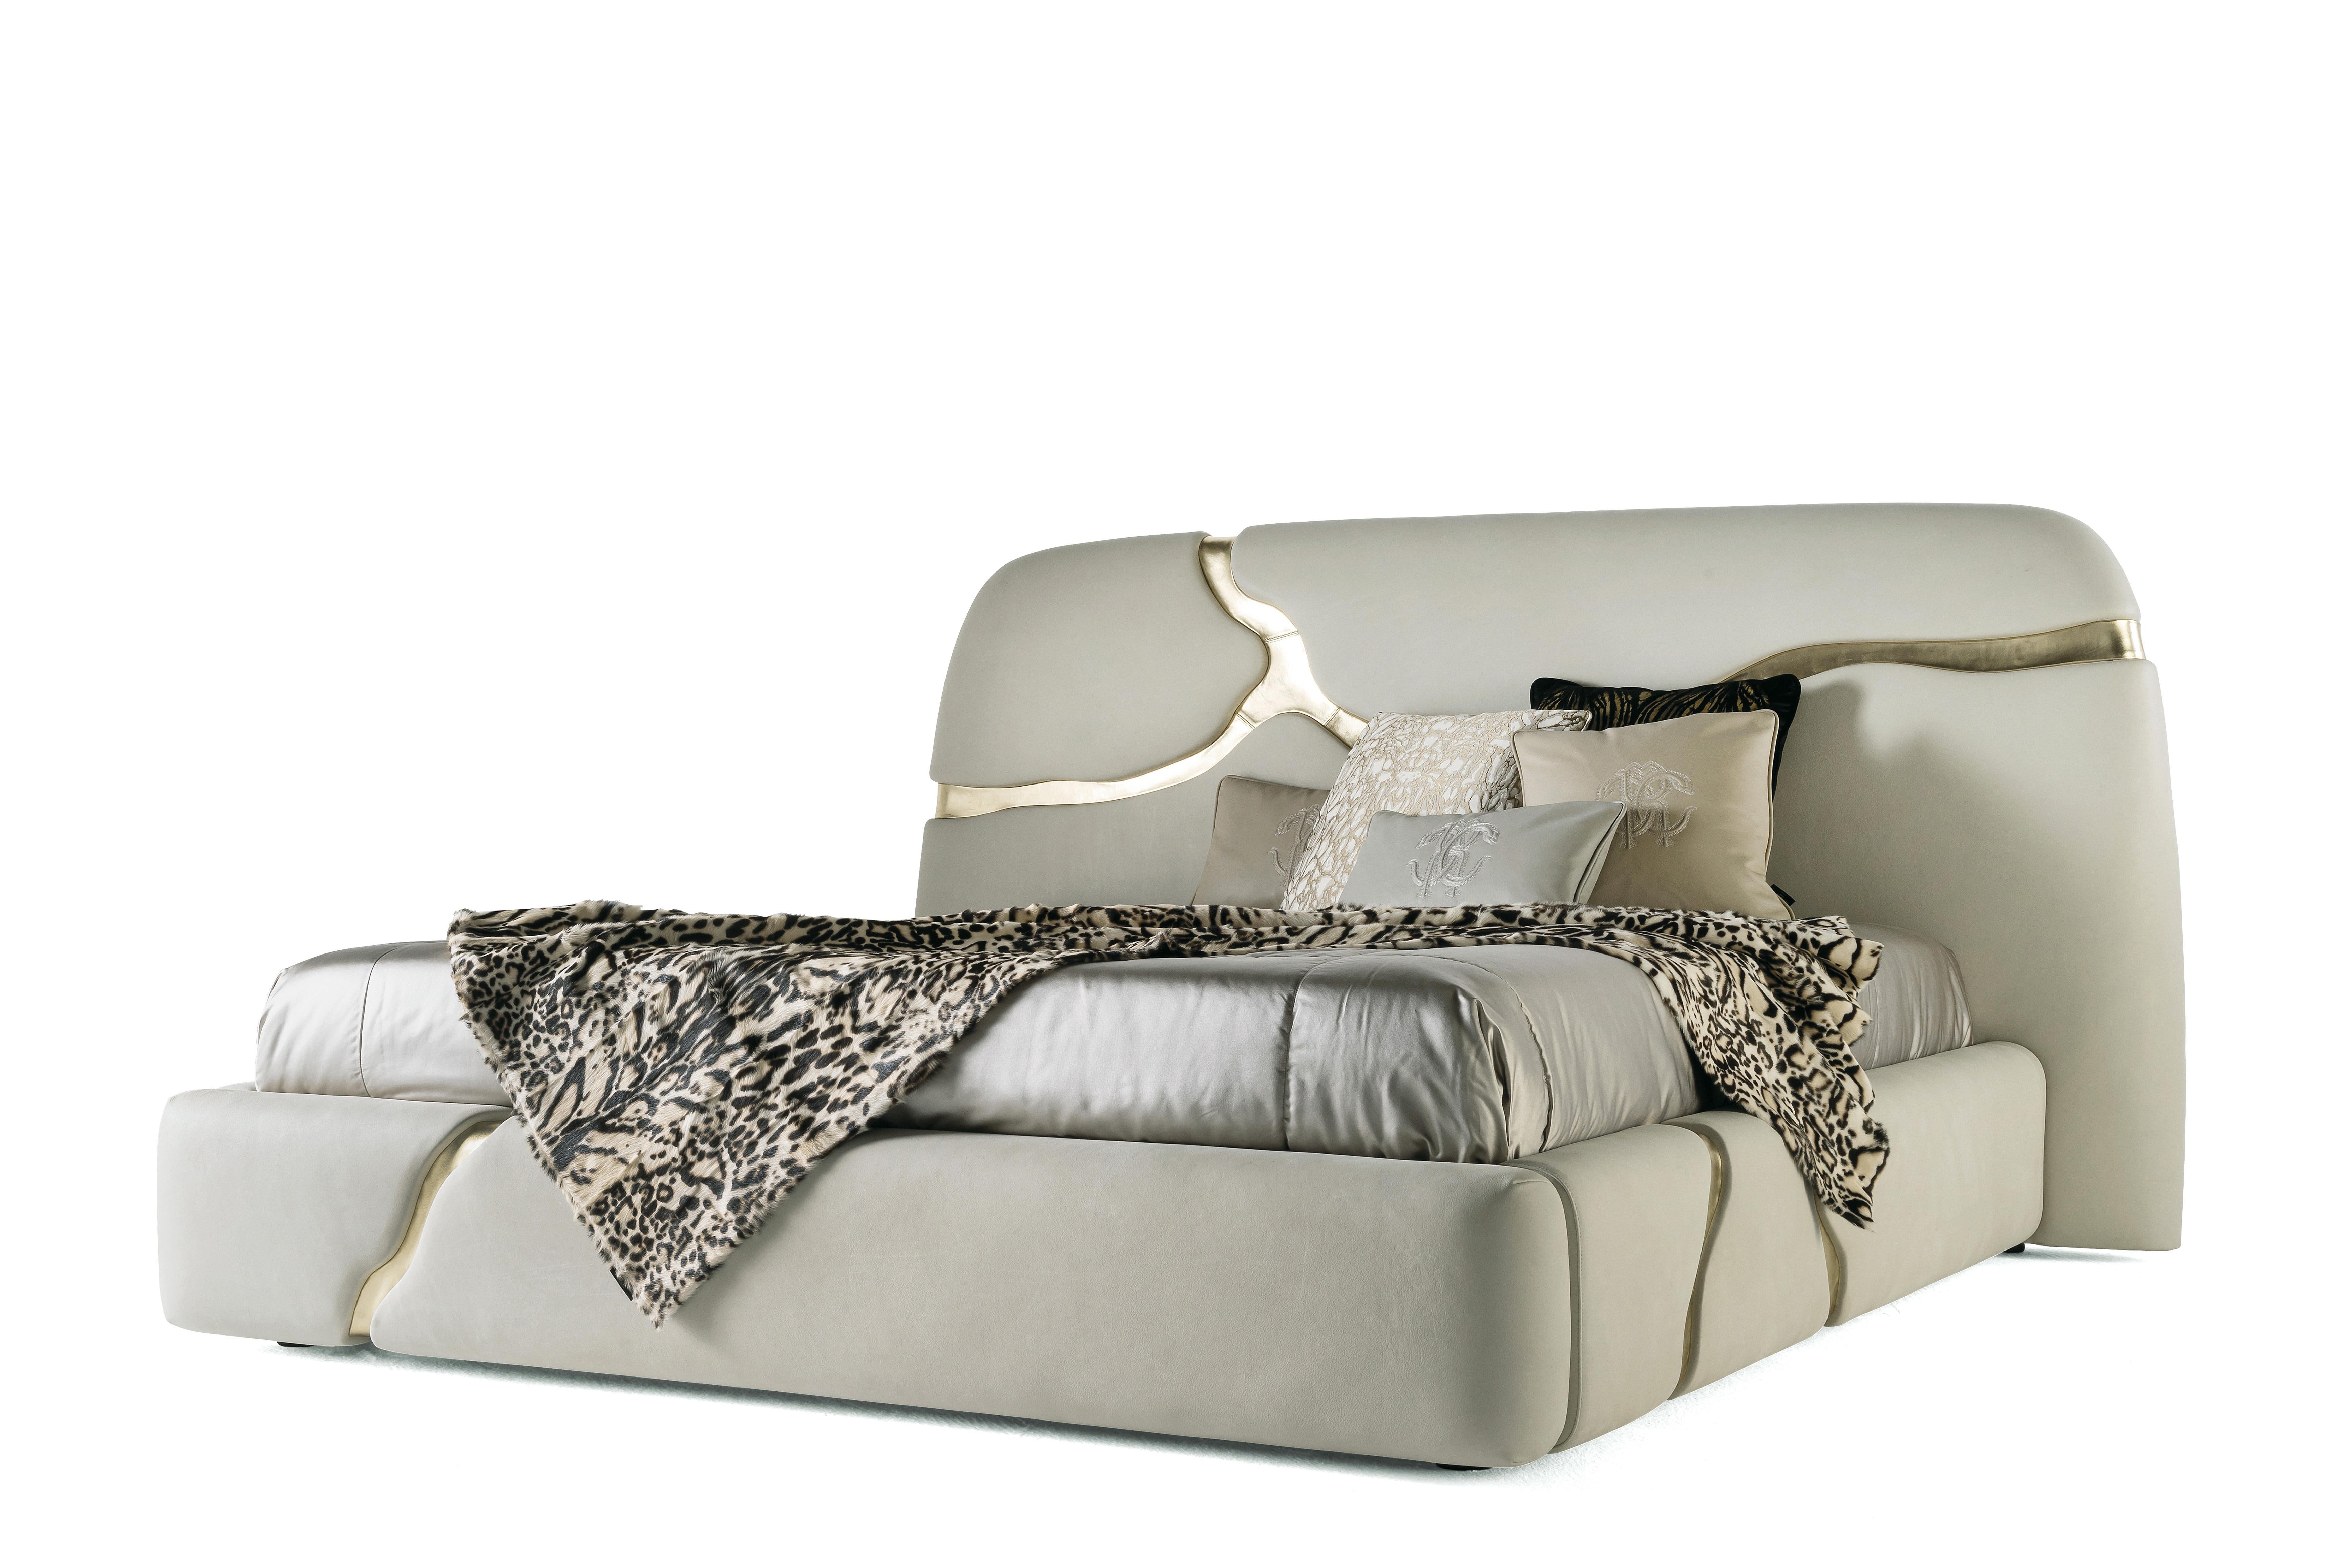 Elgon is a spectacular and fascinating bed, characterized by a large headboard whose workmanship is inspired by the kintsugi technique, the ancient Japanese art of giving new life to fragments of broken objects, enhancing the ribs created. In the